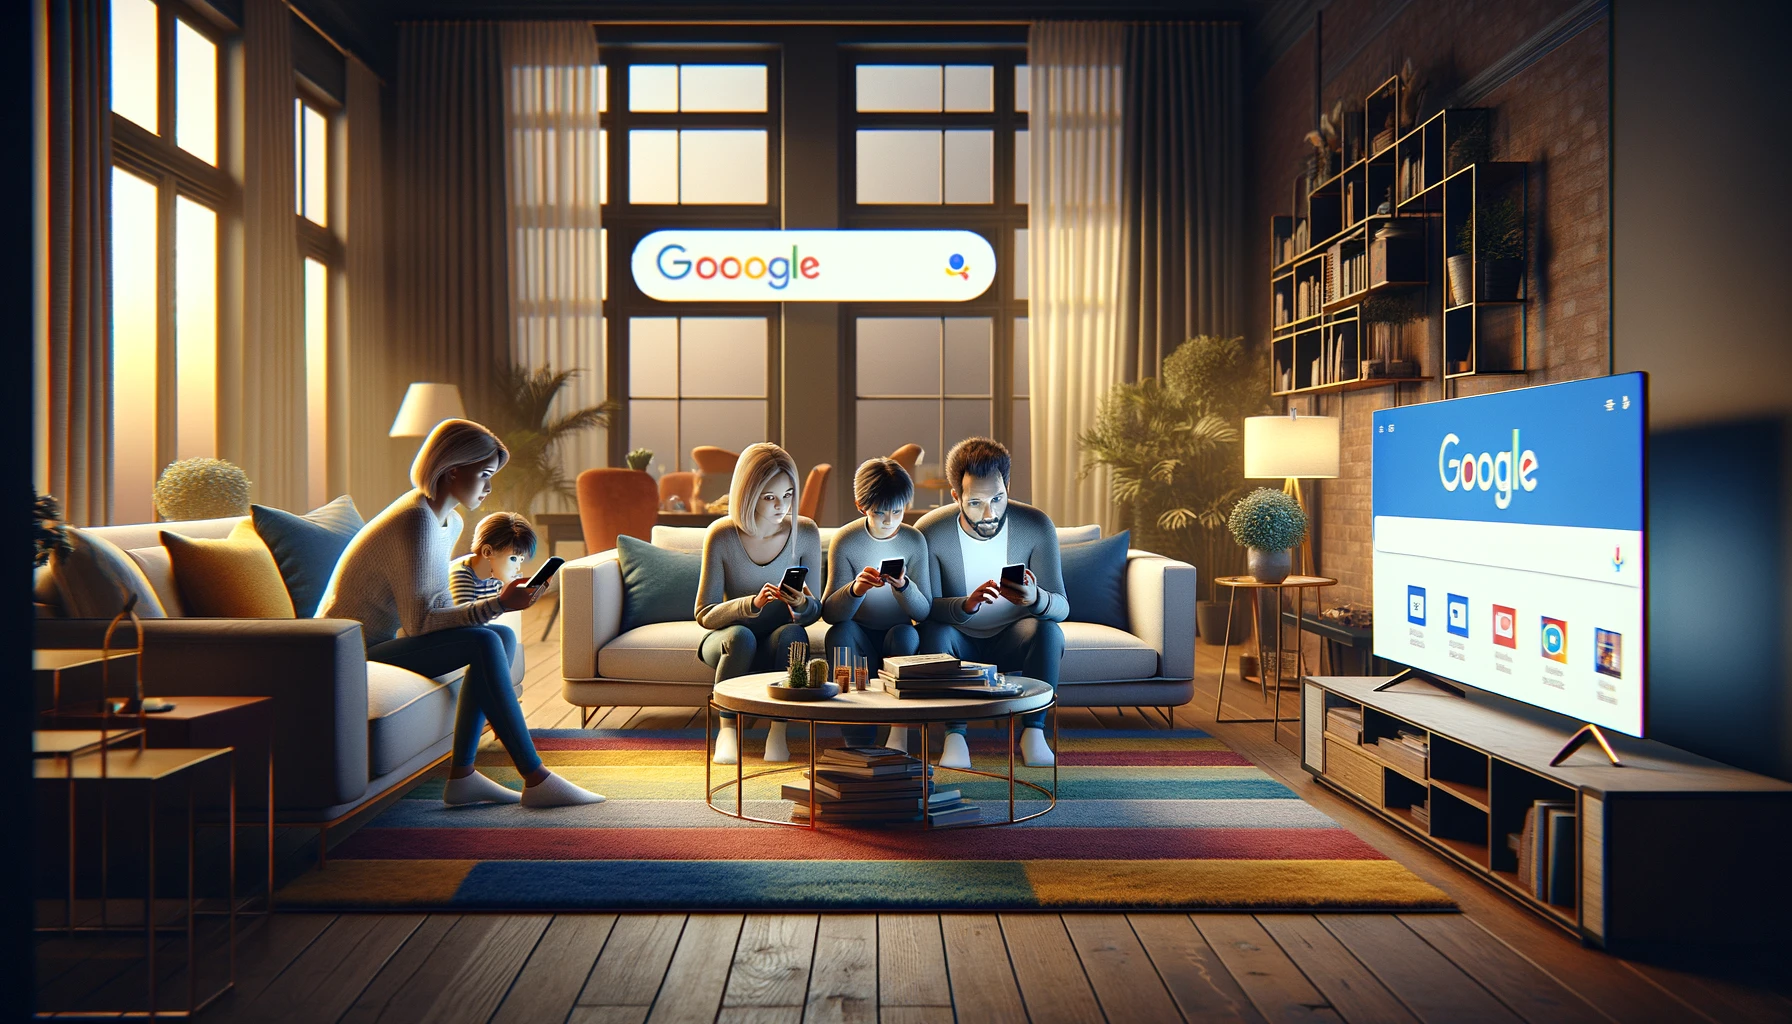 Can TV Advertising Impact Search Performance?